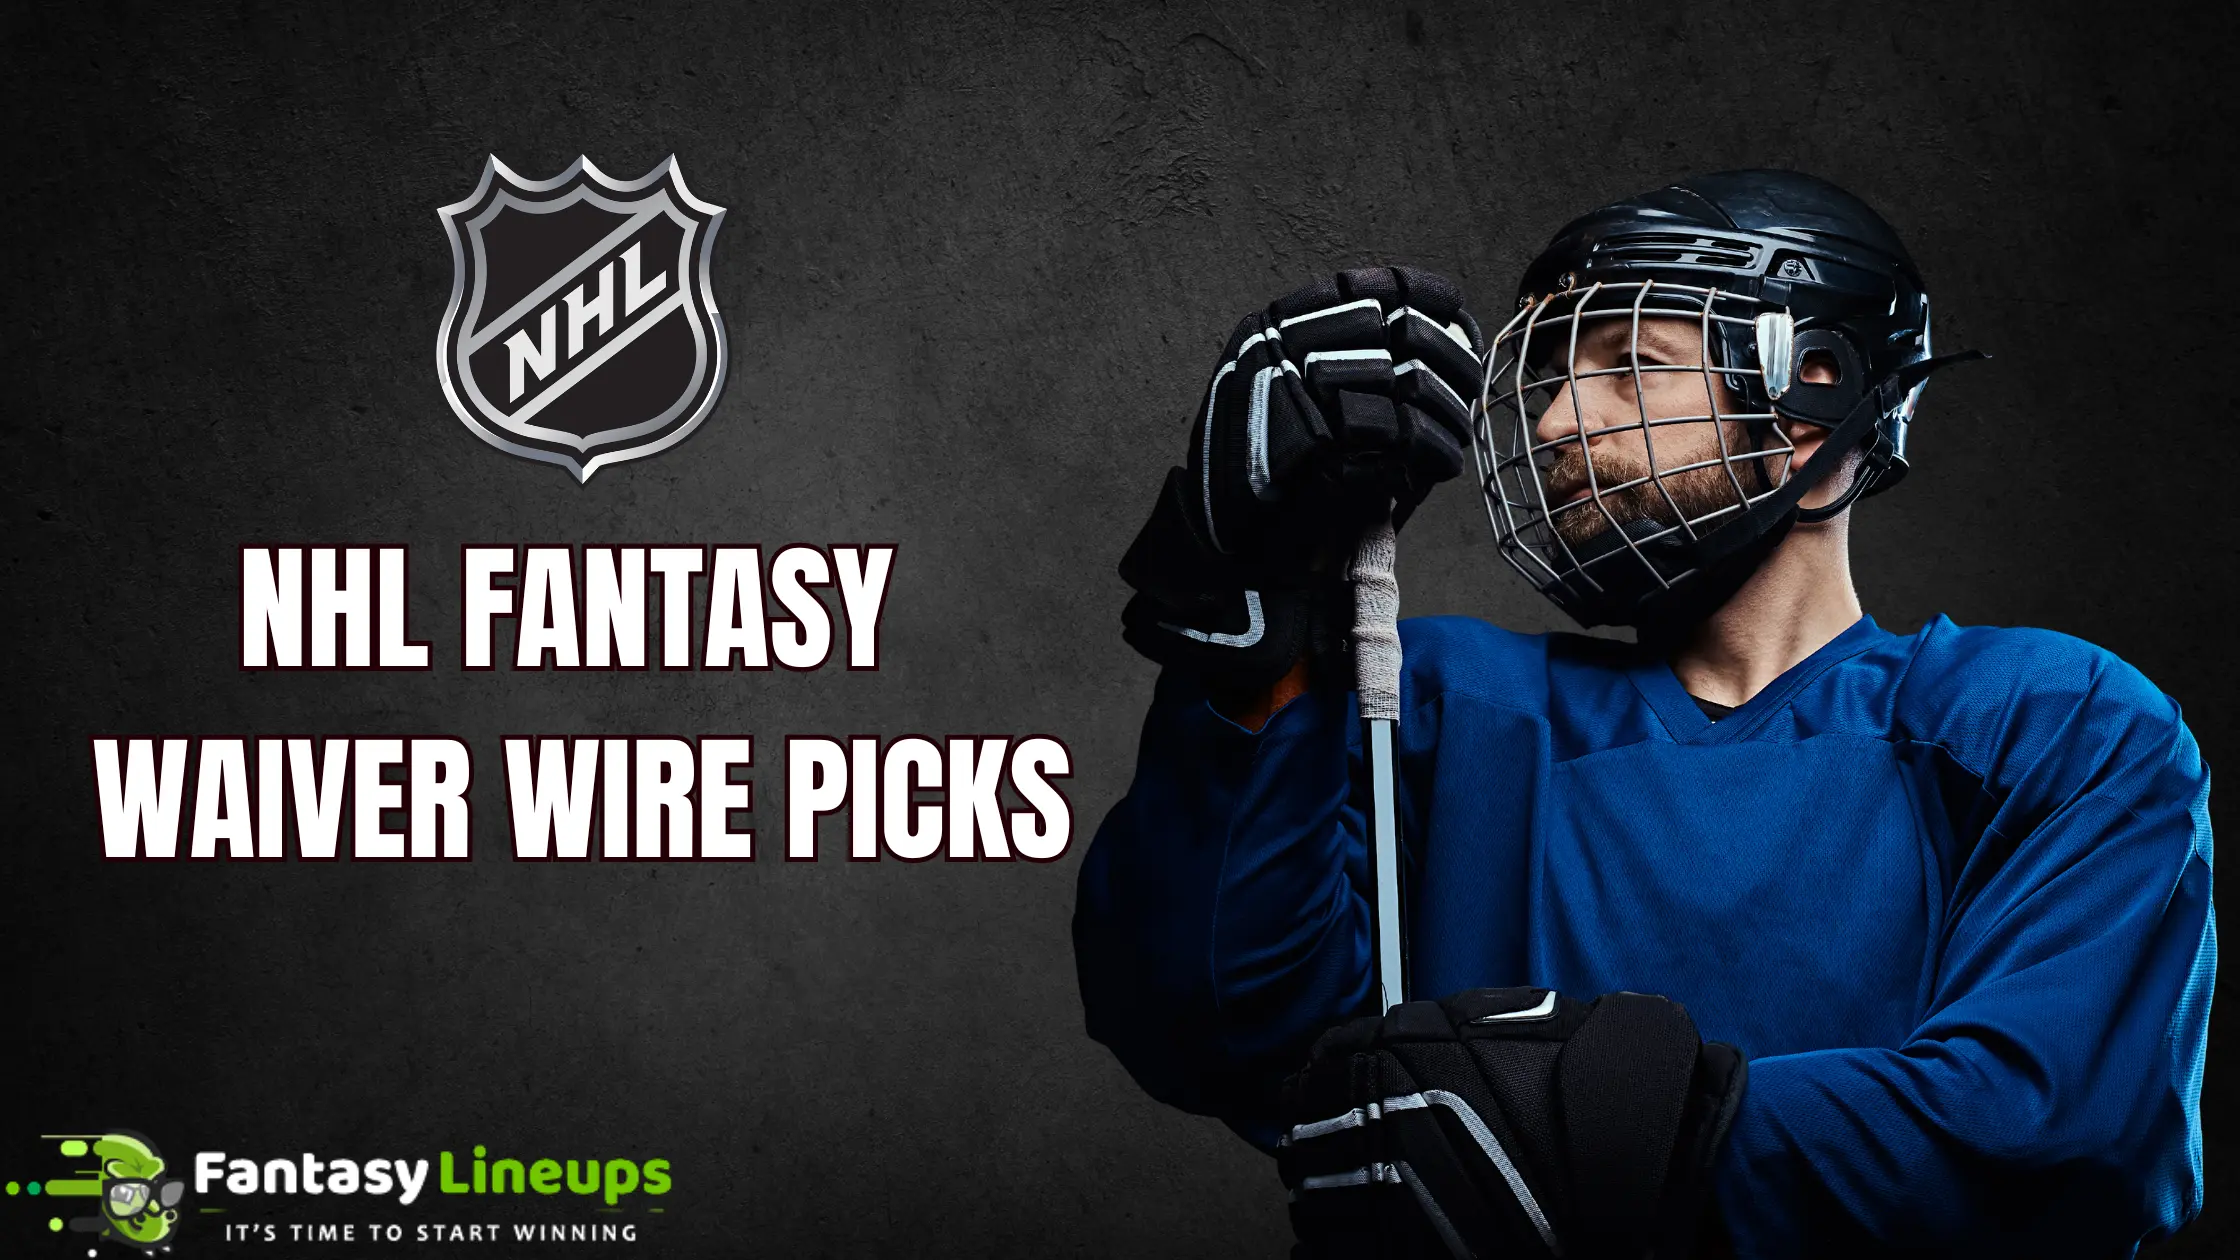 Unleash Your NHL Fantasy Potential: Essential Waiver Wire Pickups to Dominate Your League